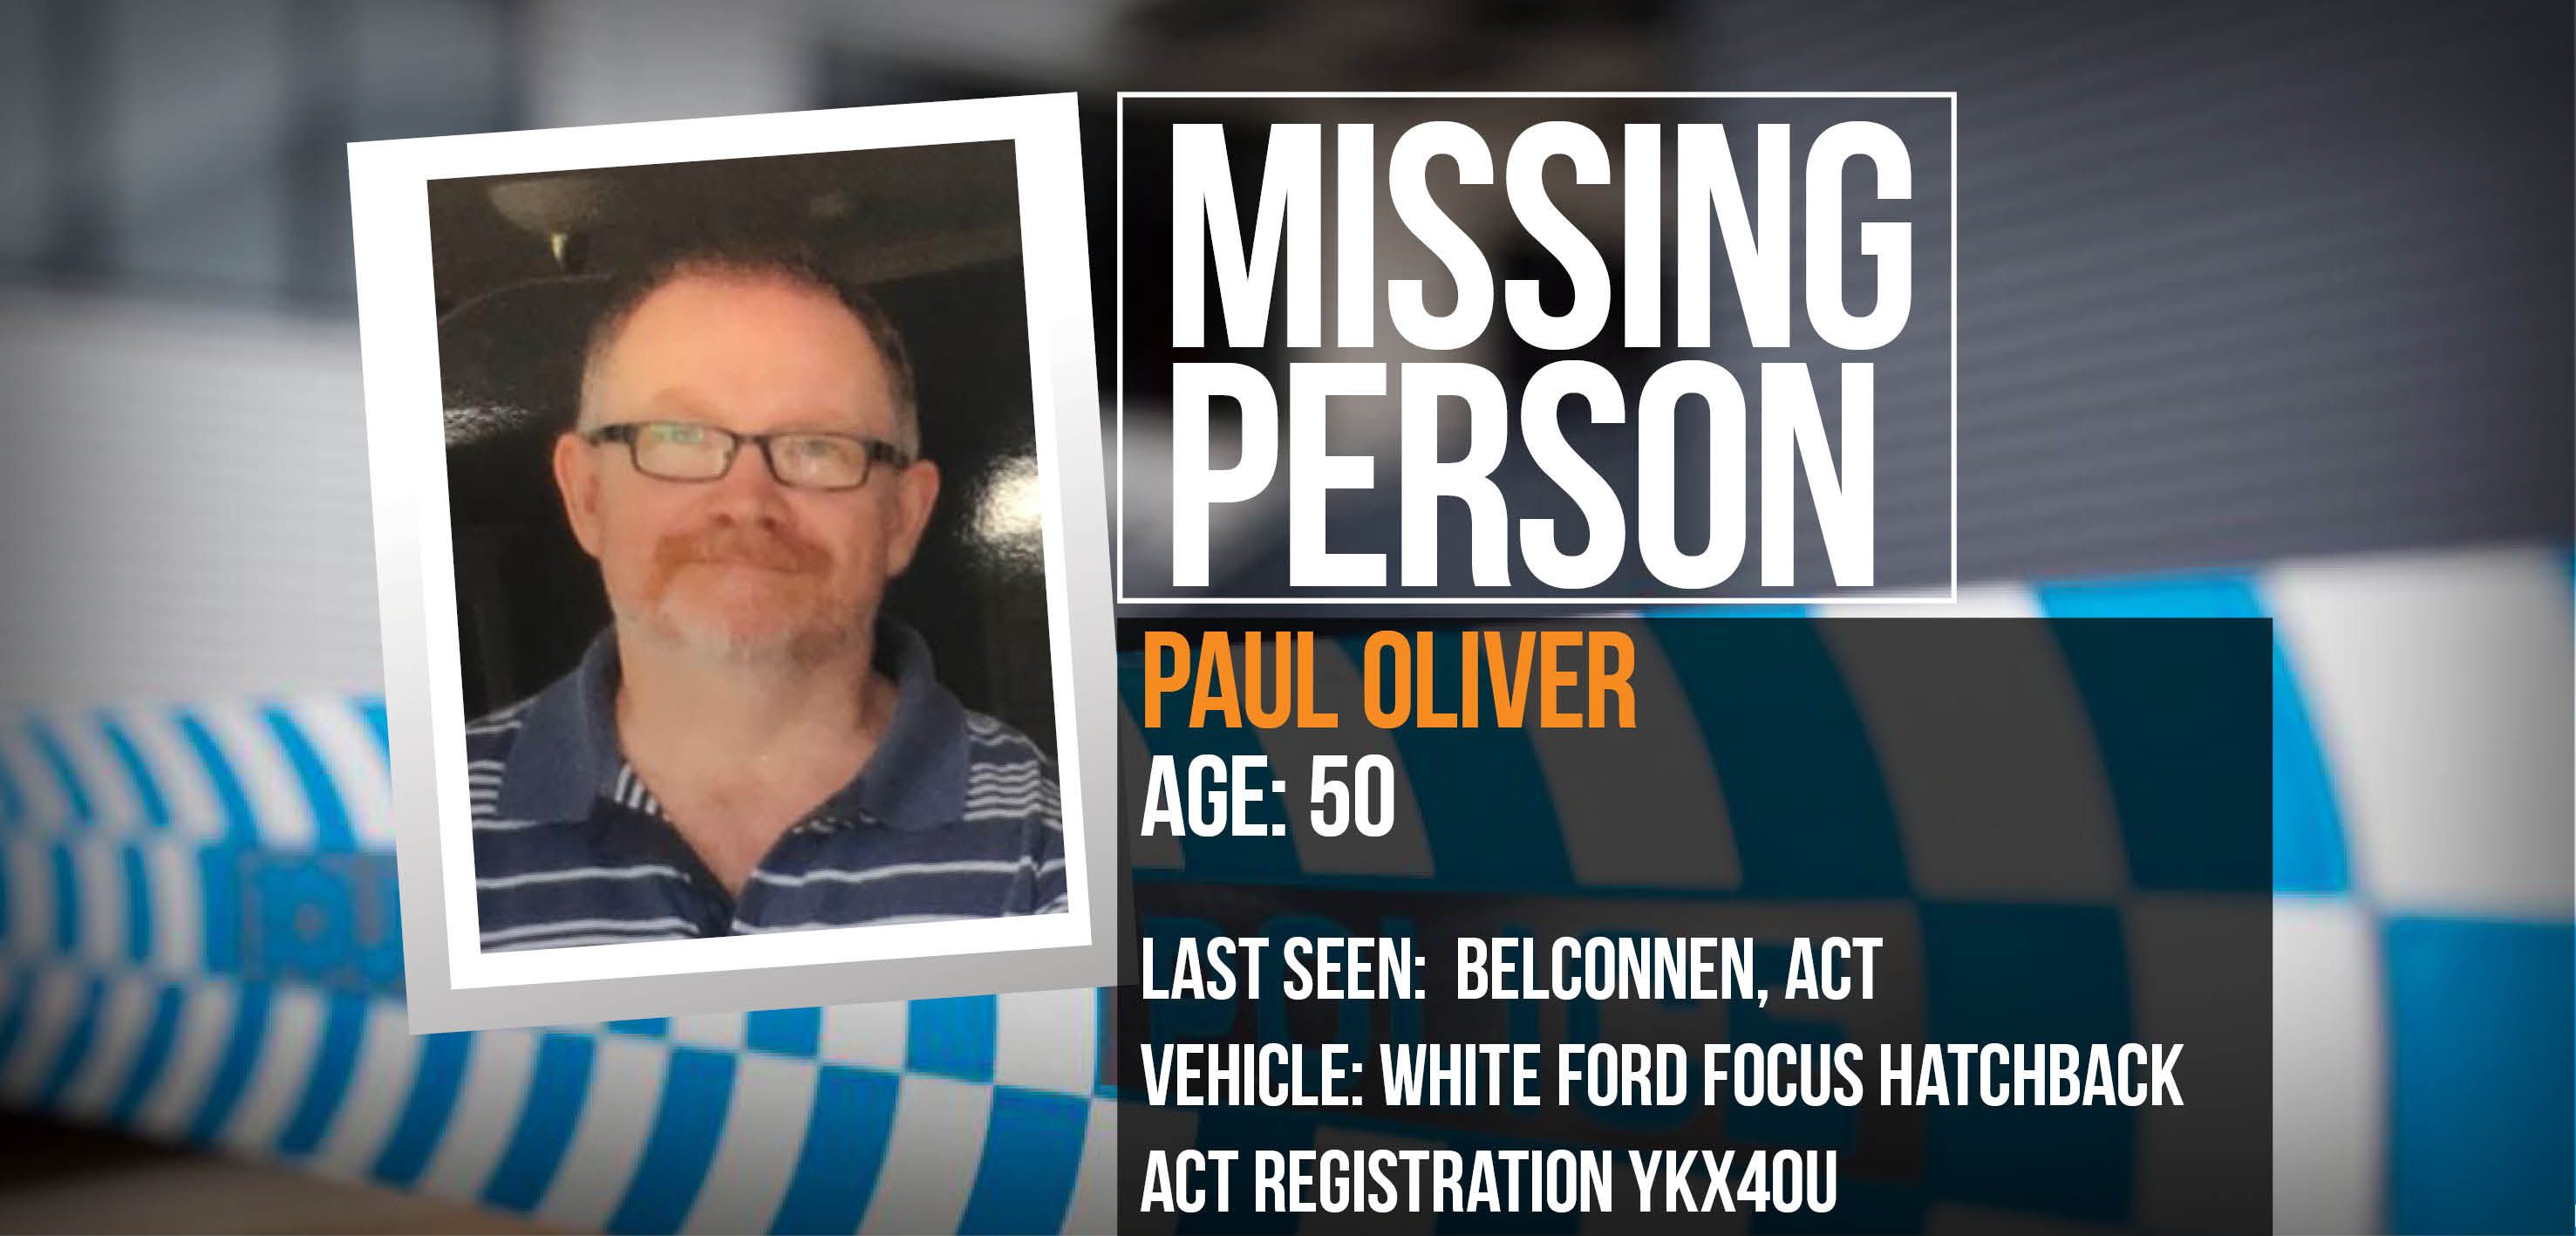 MISSING PERSON PAUL_OLIVER.jpg